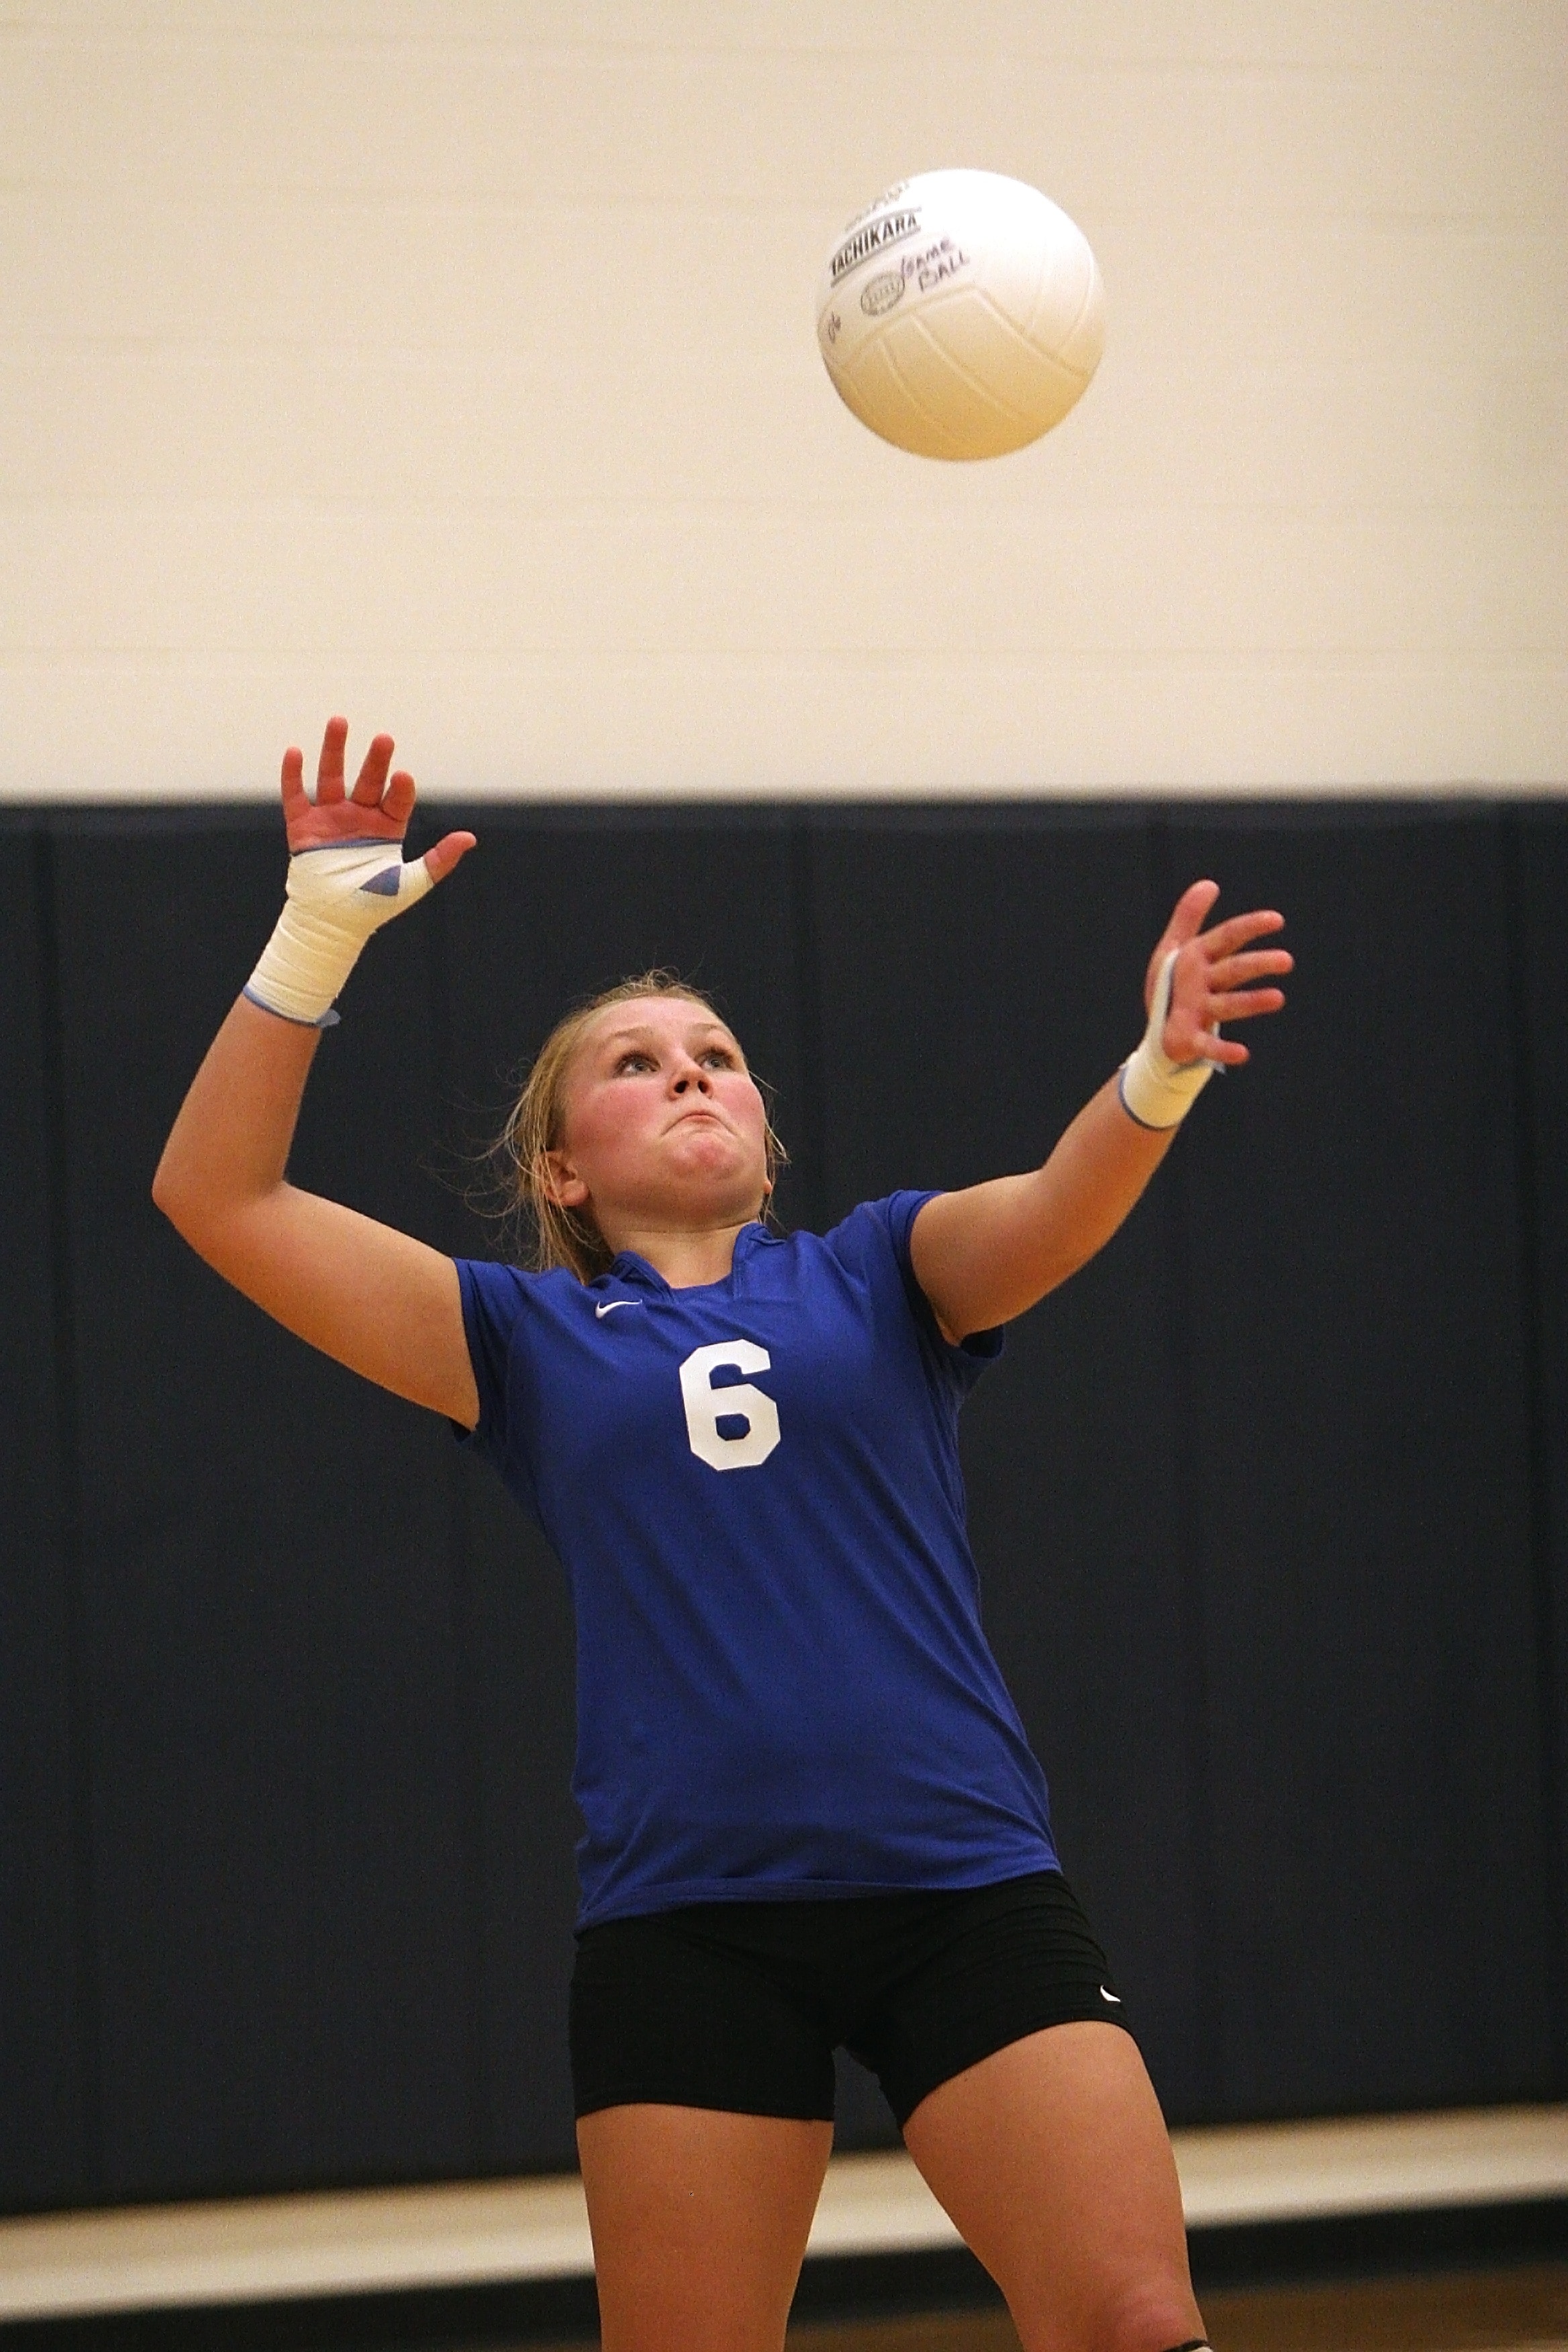 Volley ball player image